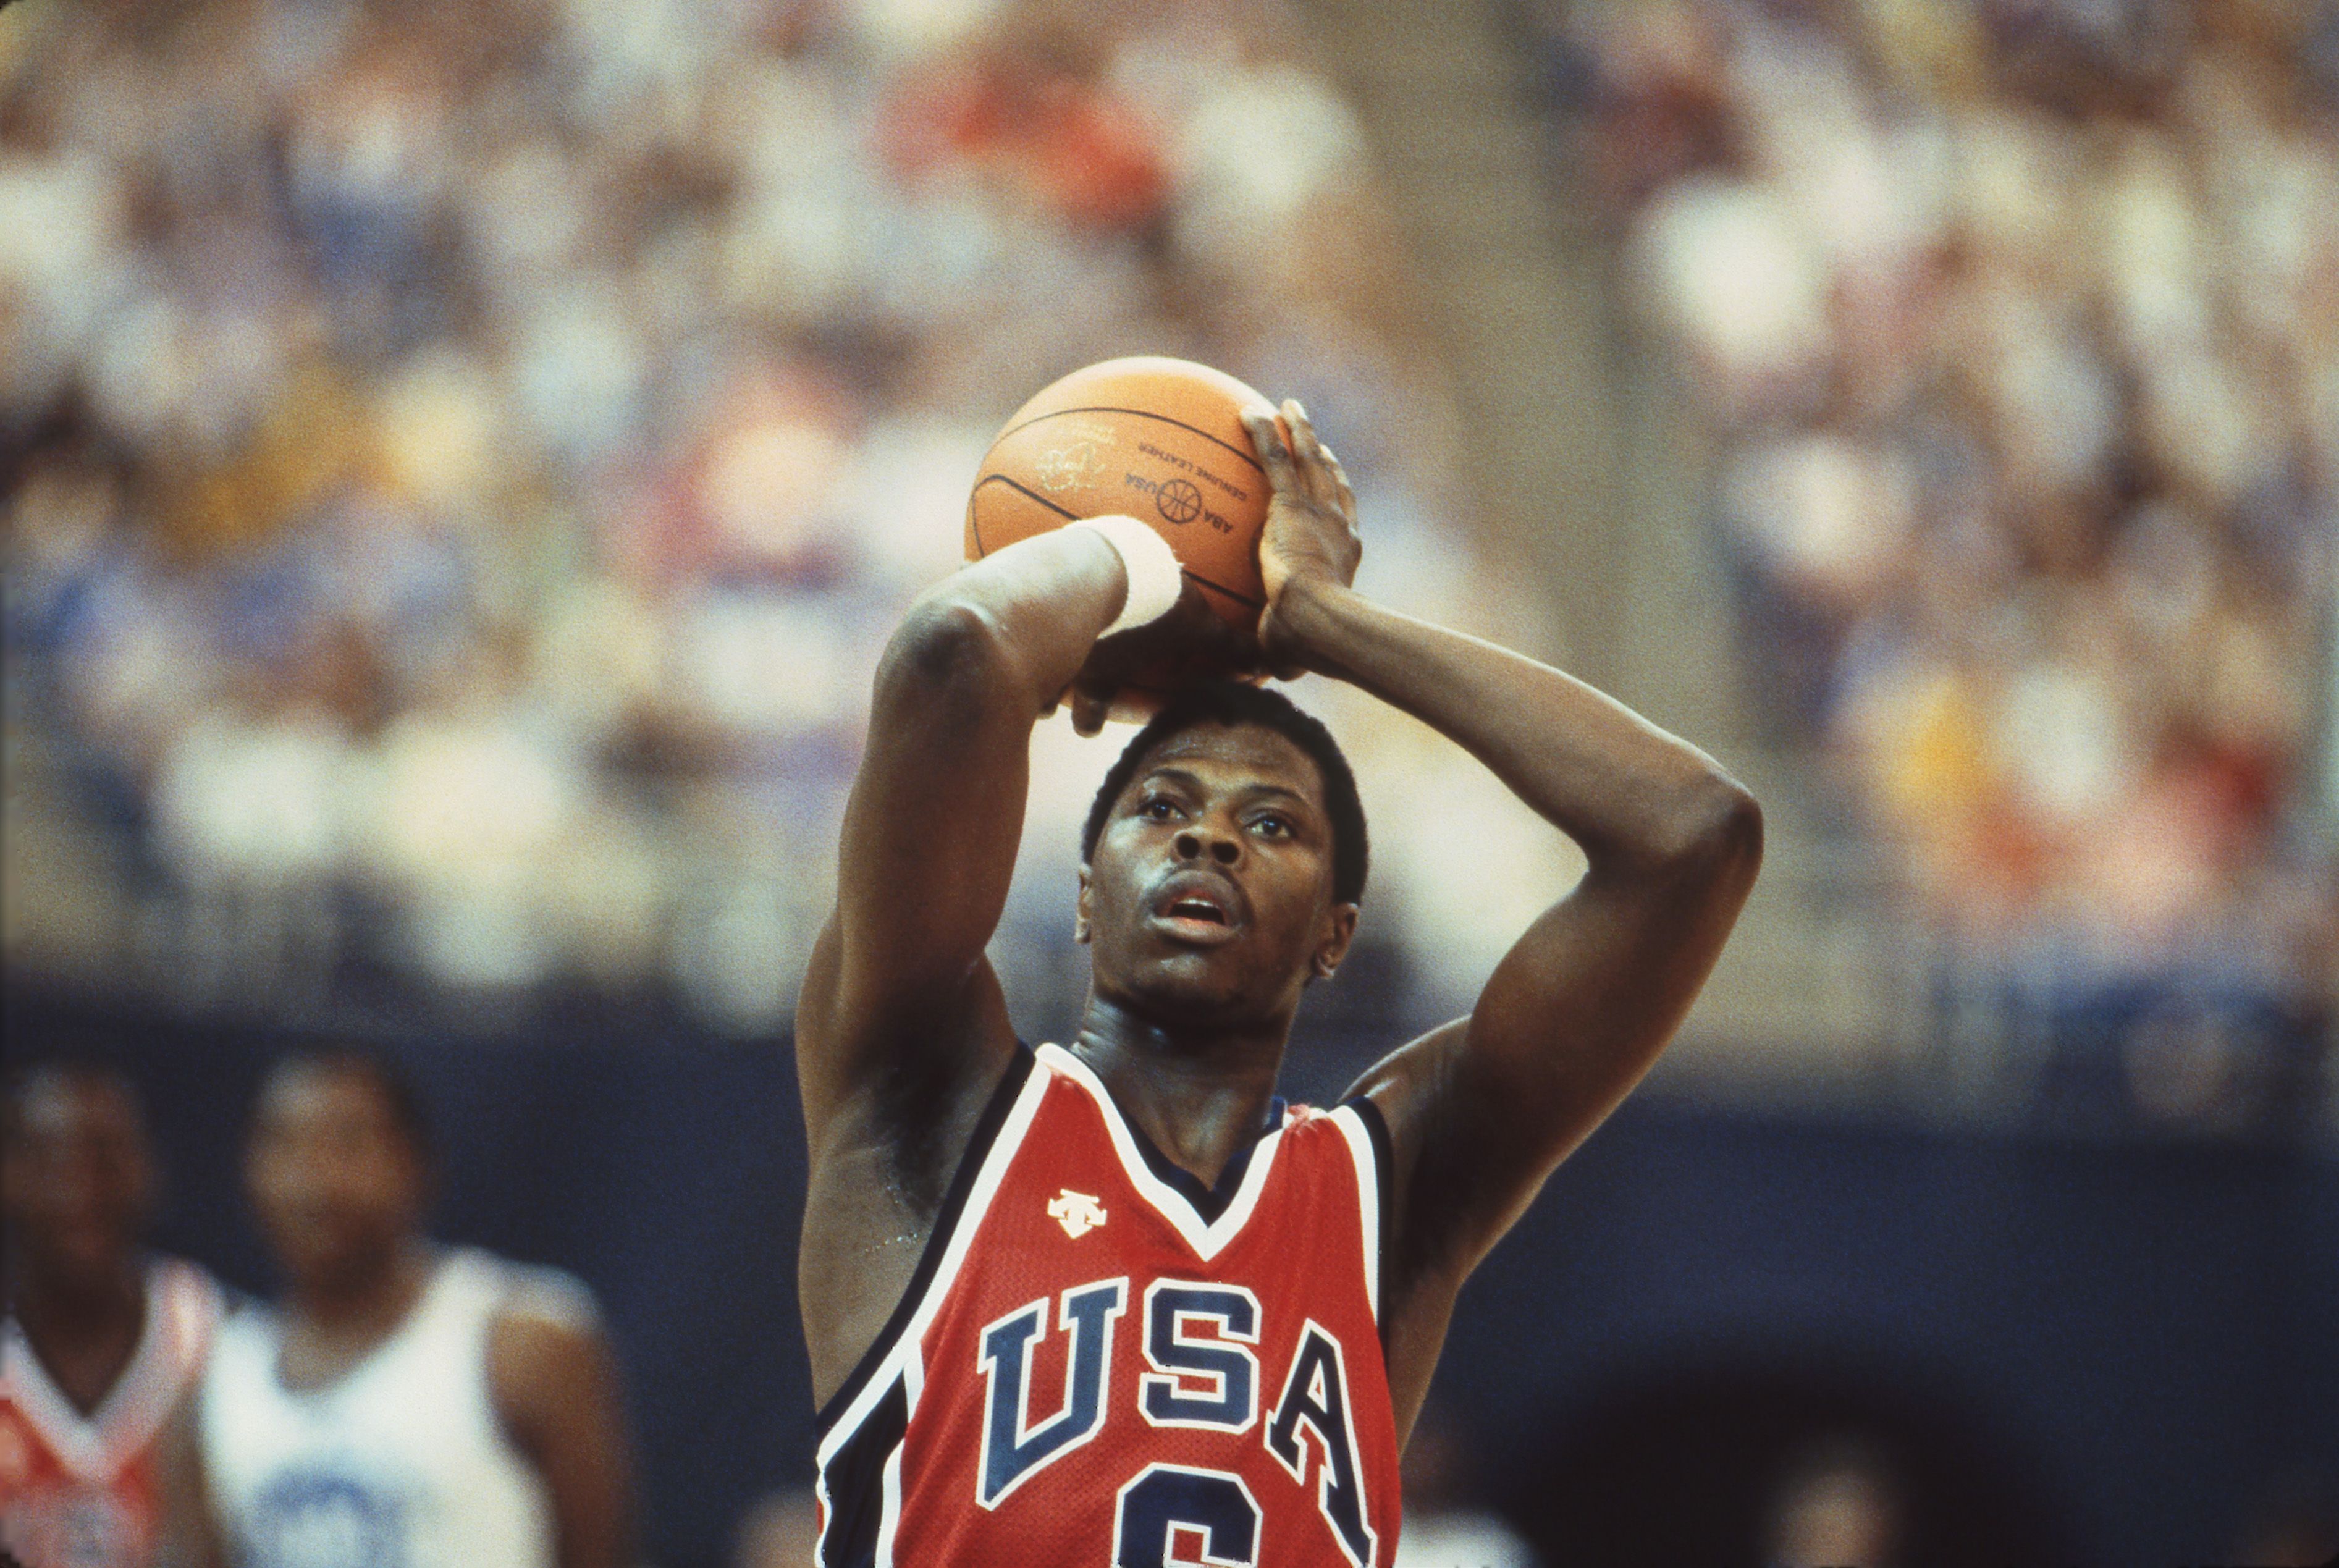 Patrick Ewing playing to the USA Men's Basketball team during the 1984 Olympics at the Los Angeles Memorial Coliseum | Photo: Heinz Kluetmeier /Walt Disney Television via Getty Images